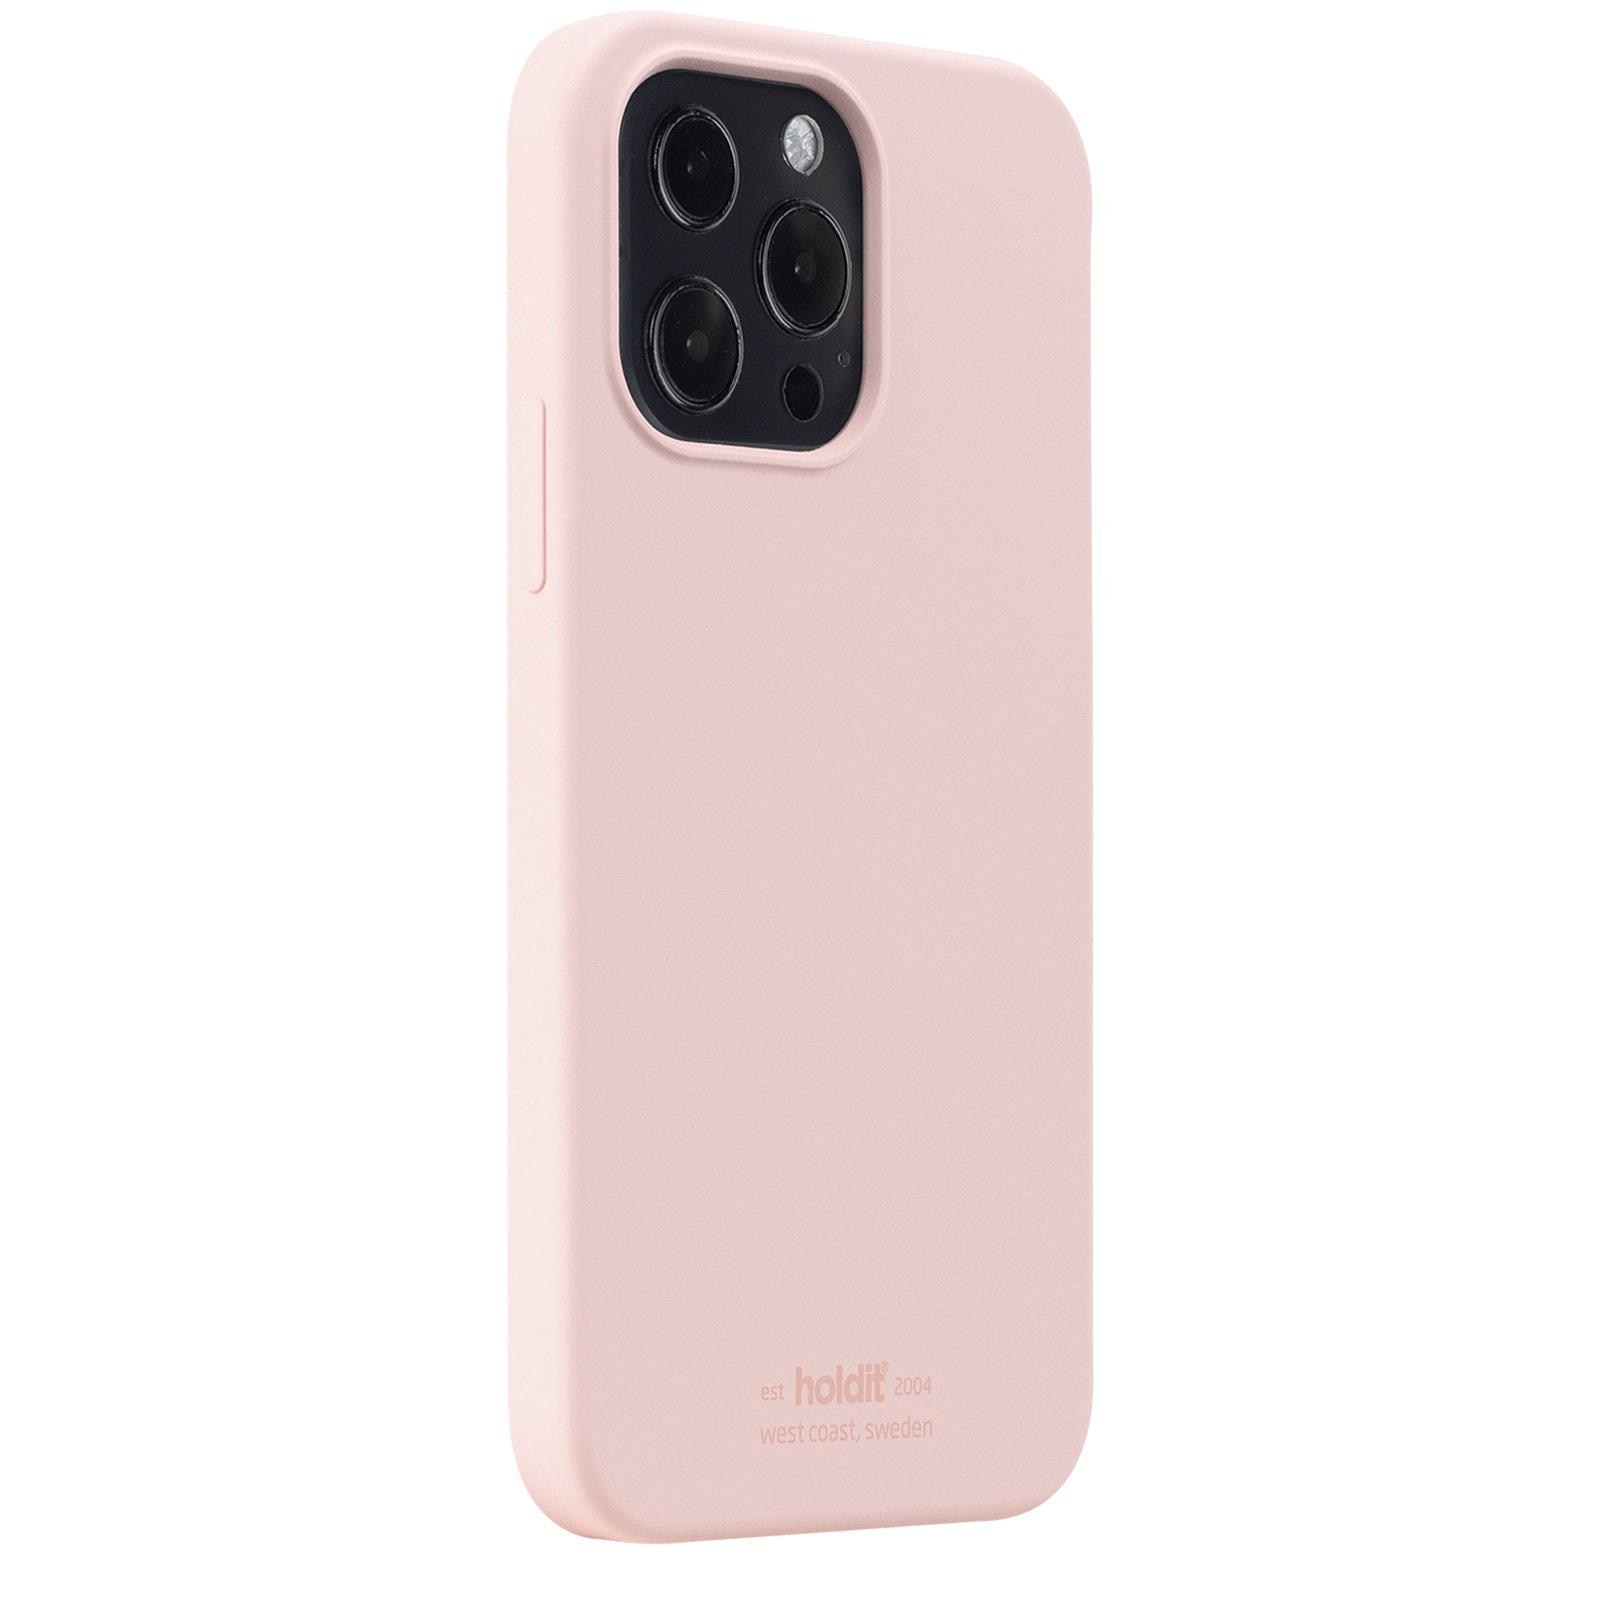 Coque en silicone iPhone 13 Pro Max, Blush Pink